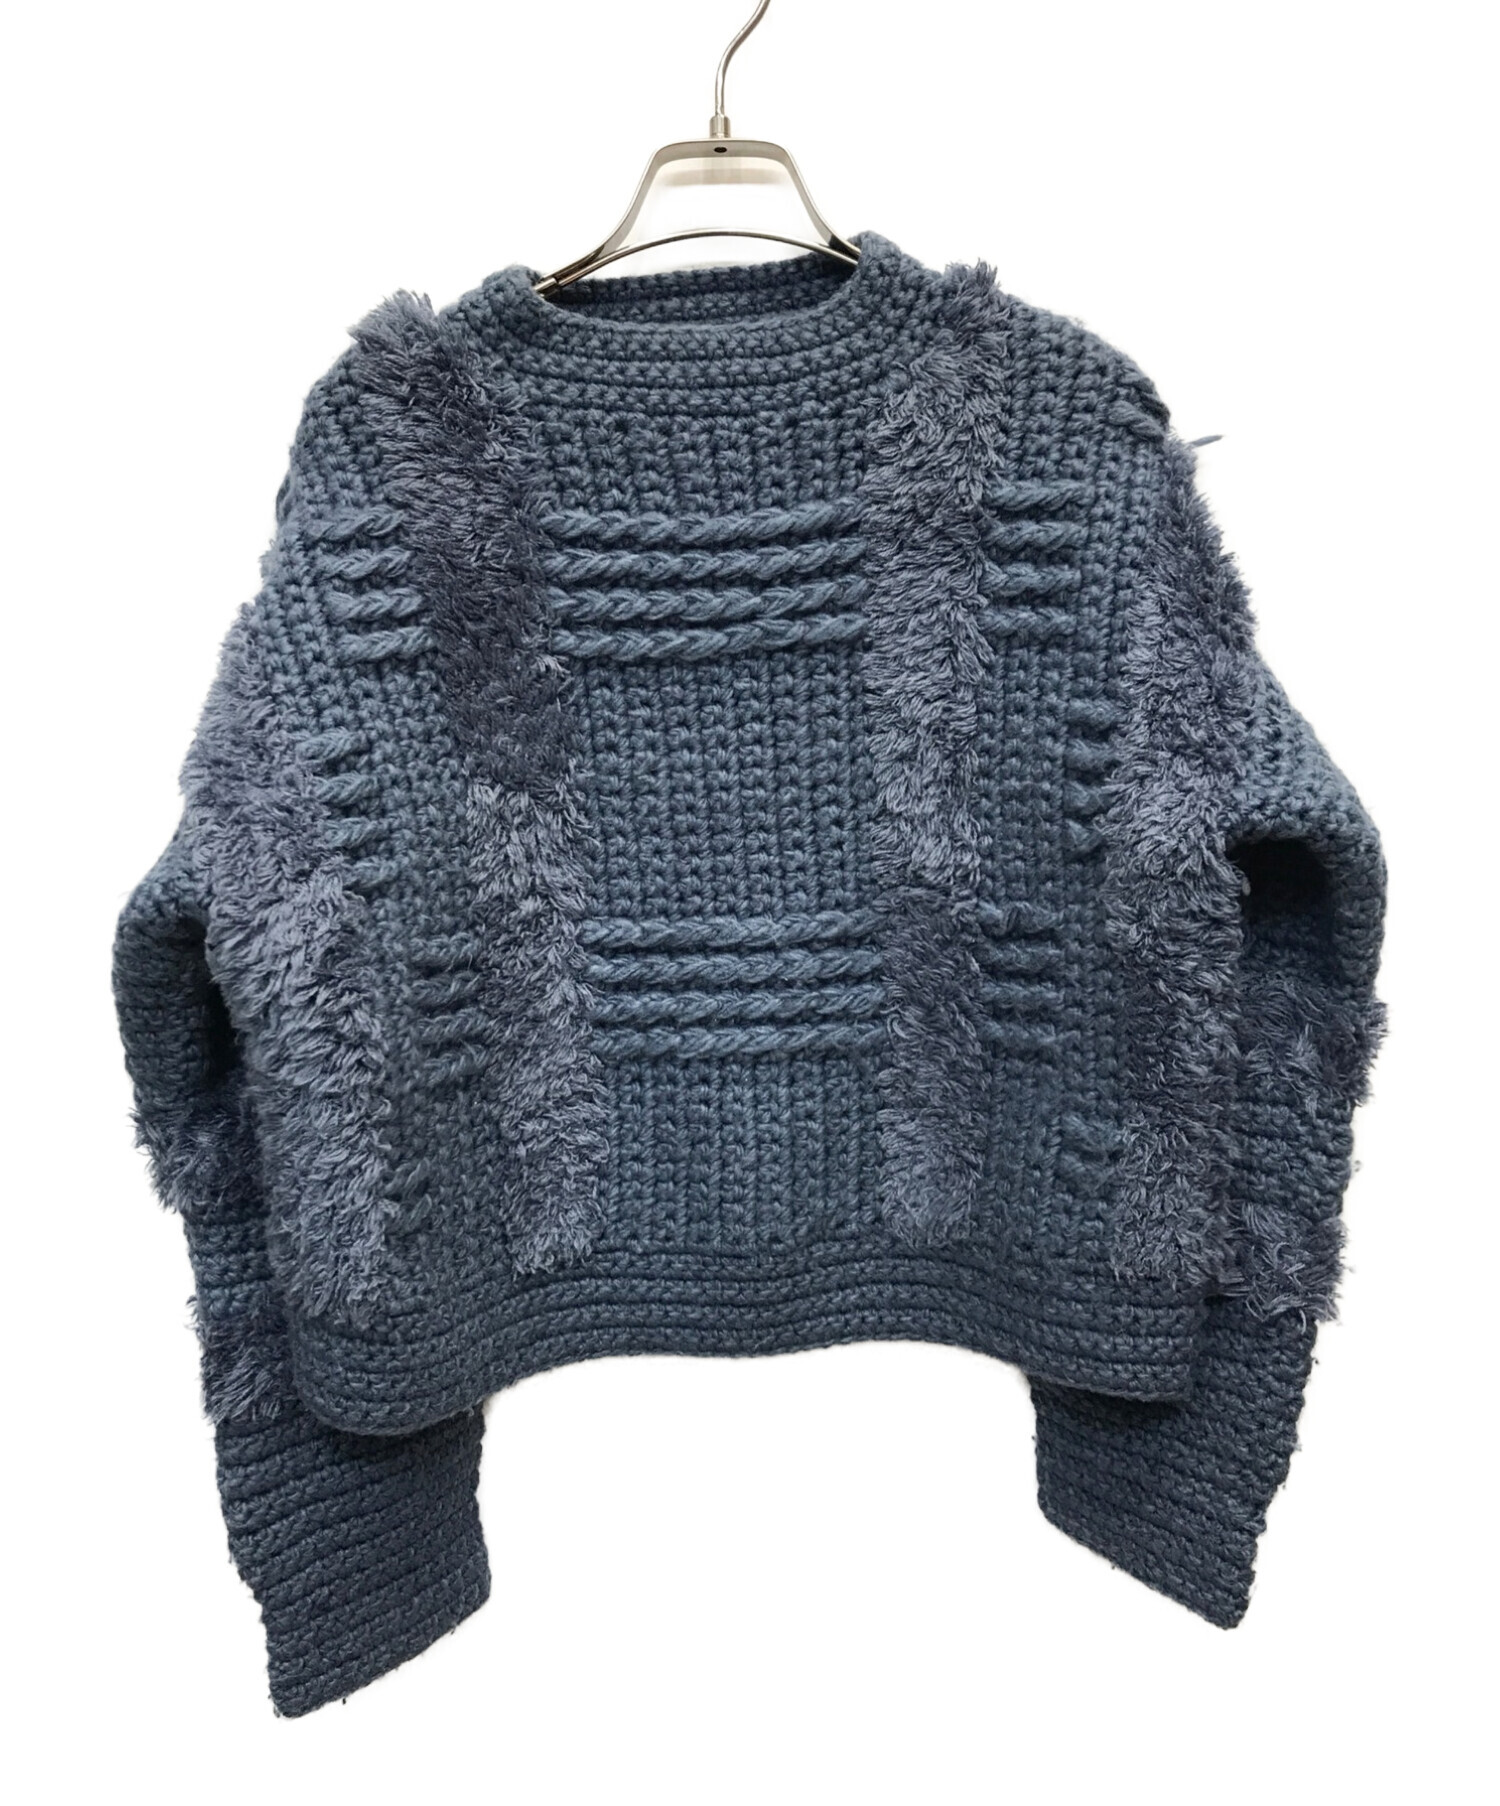 WIDE CHECK HAND KNIT